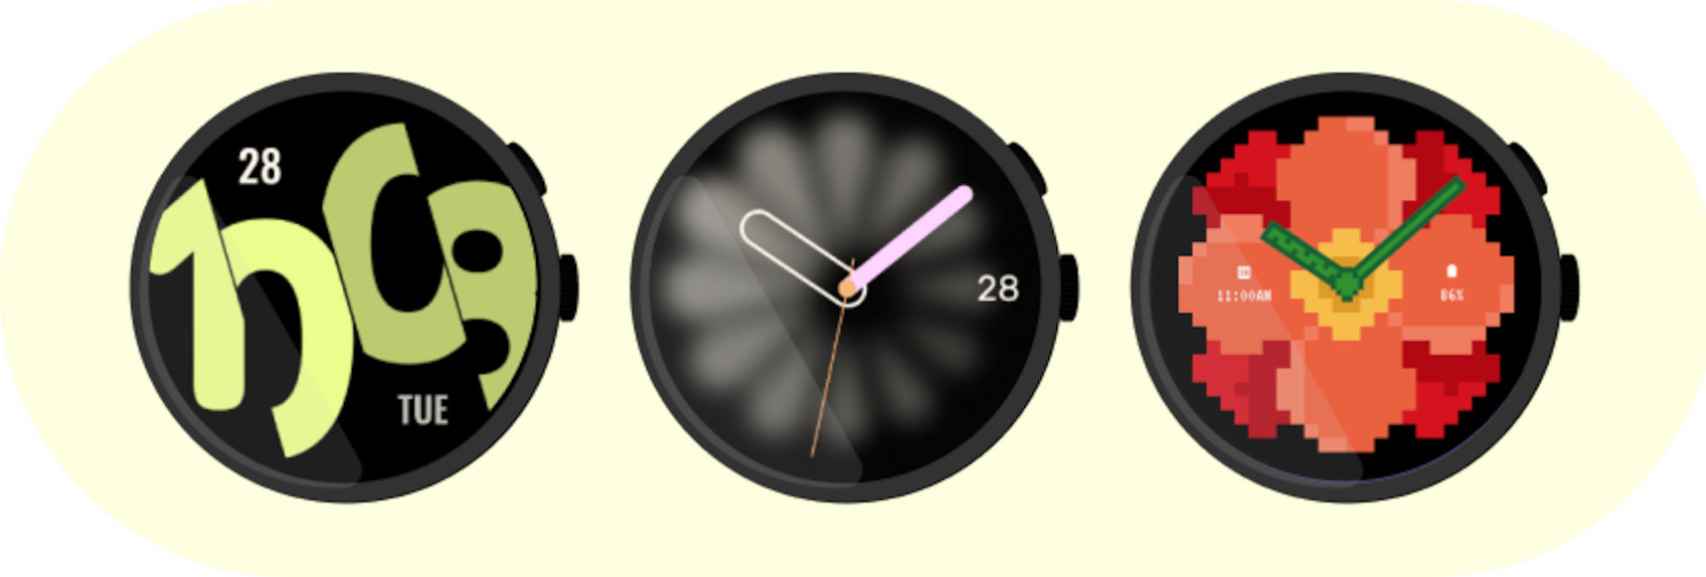 Wear OS 4 lets you create watch faces and distribute them on Google Play